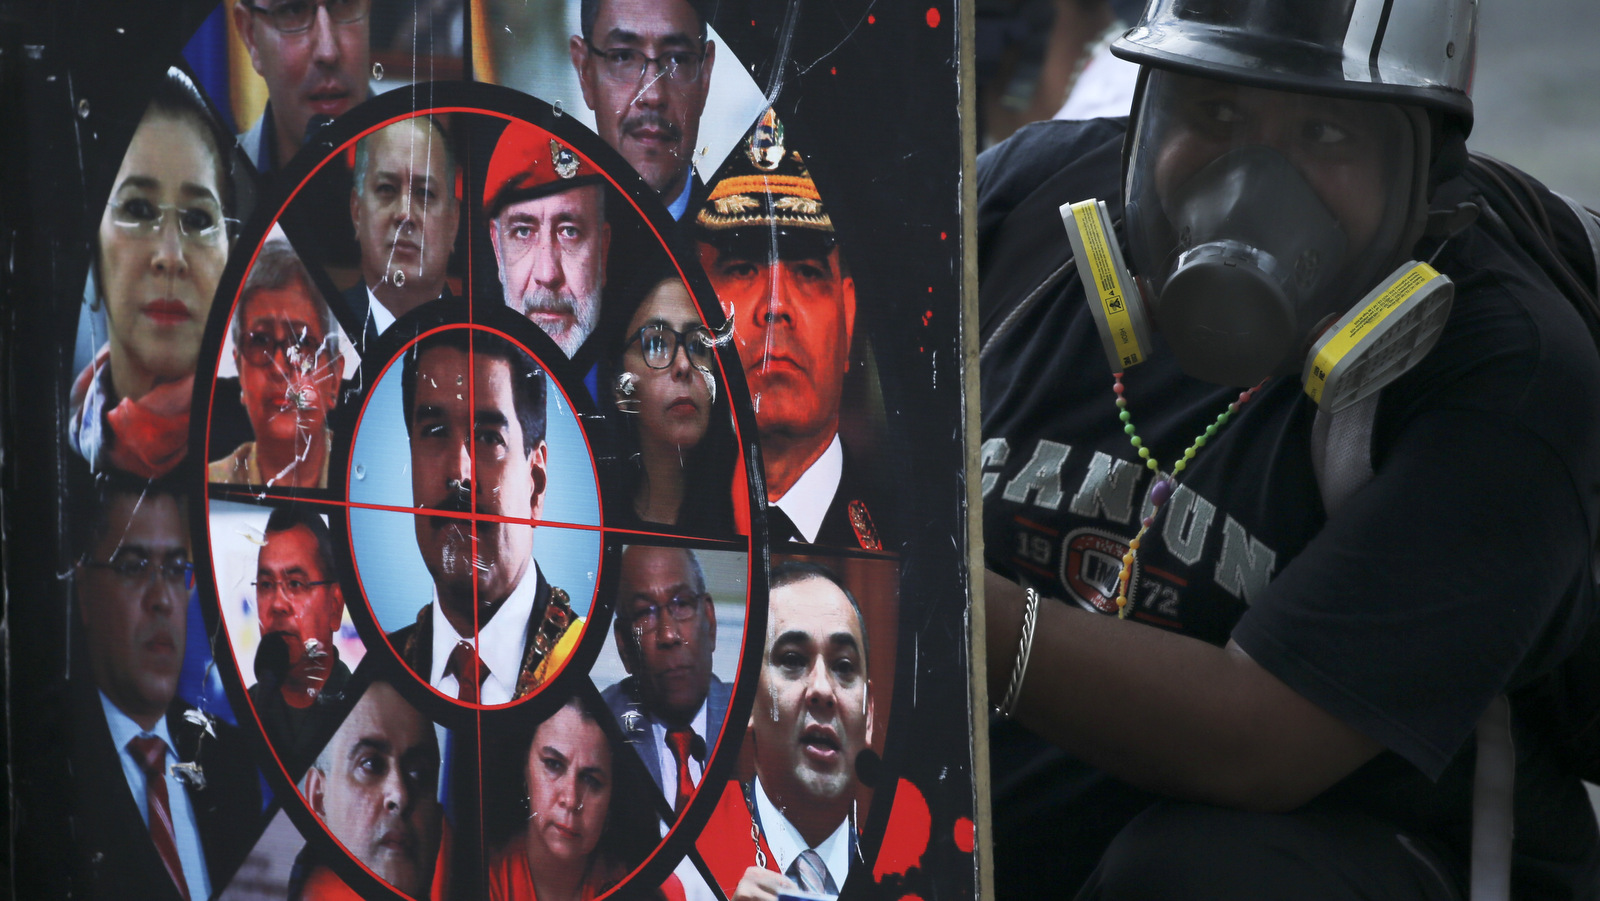 An anti-government protester holds a shield brandished with photos of President Nicolas Maduro, government officials and a gun sight, during clashes with security forces in Caracas, Venezuela, July 22, 2017. (AP/Fernando Llano)